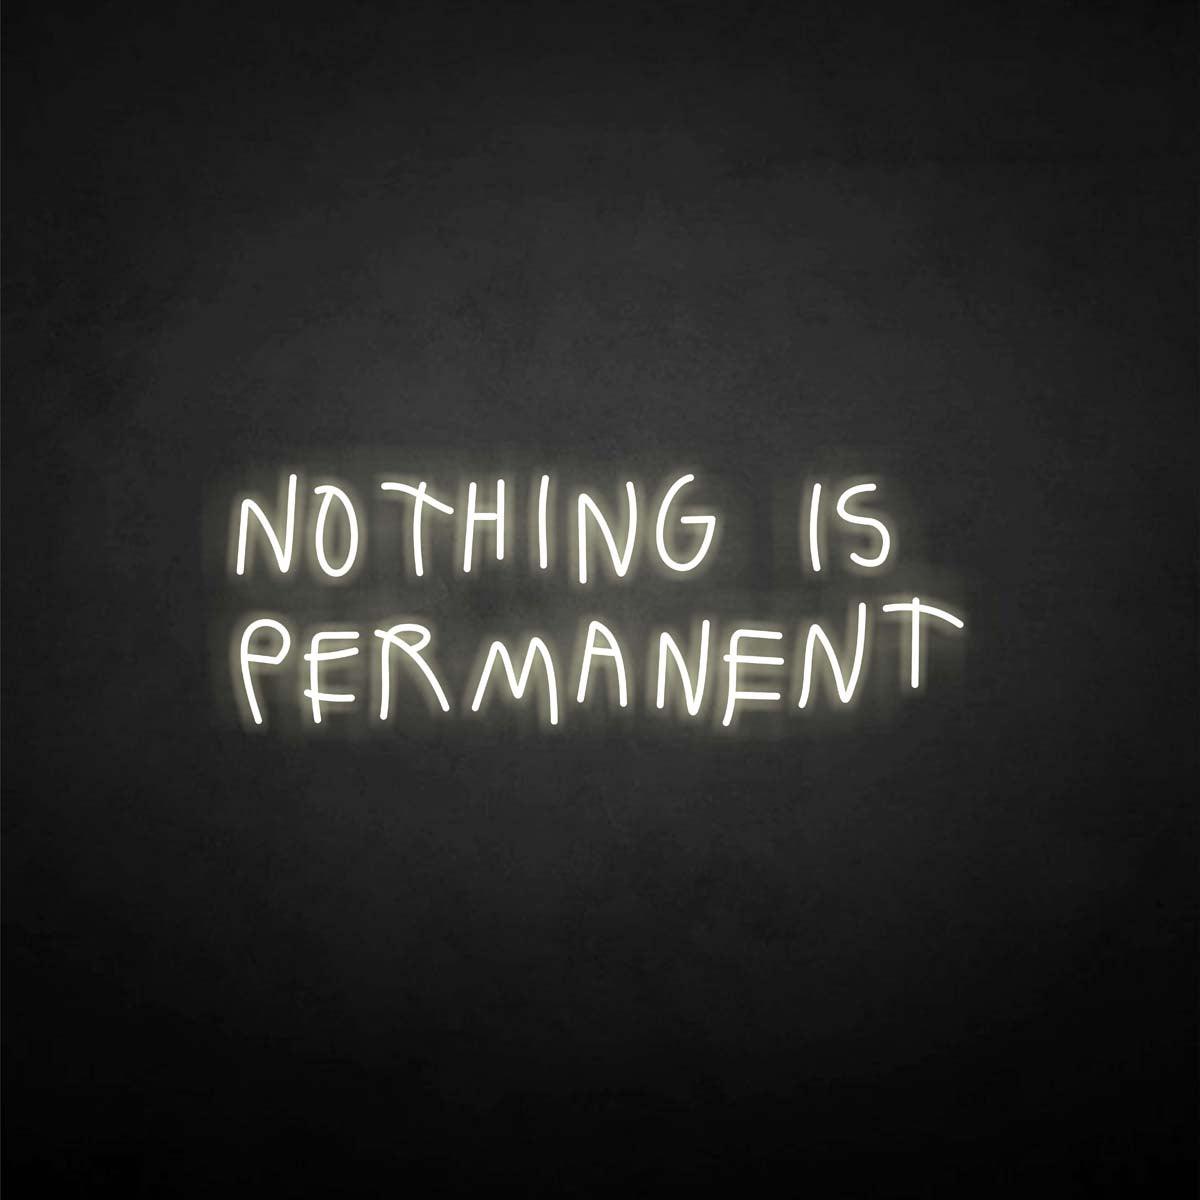 'NOTHING IS PERMANET' neon sign